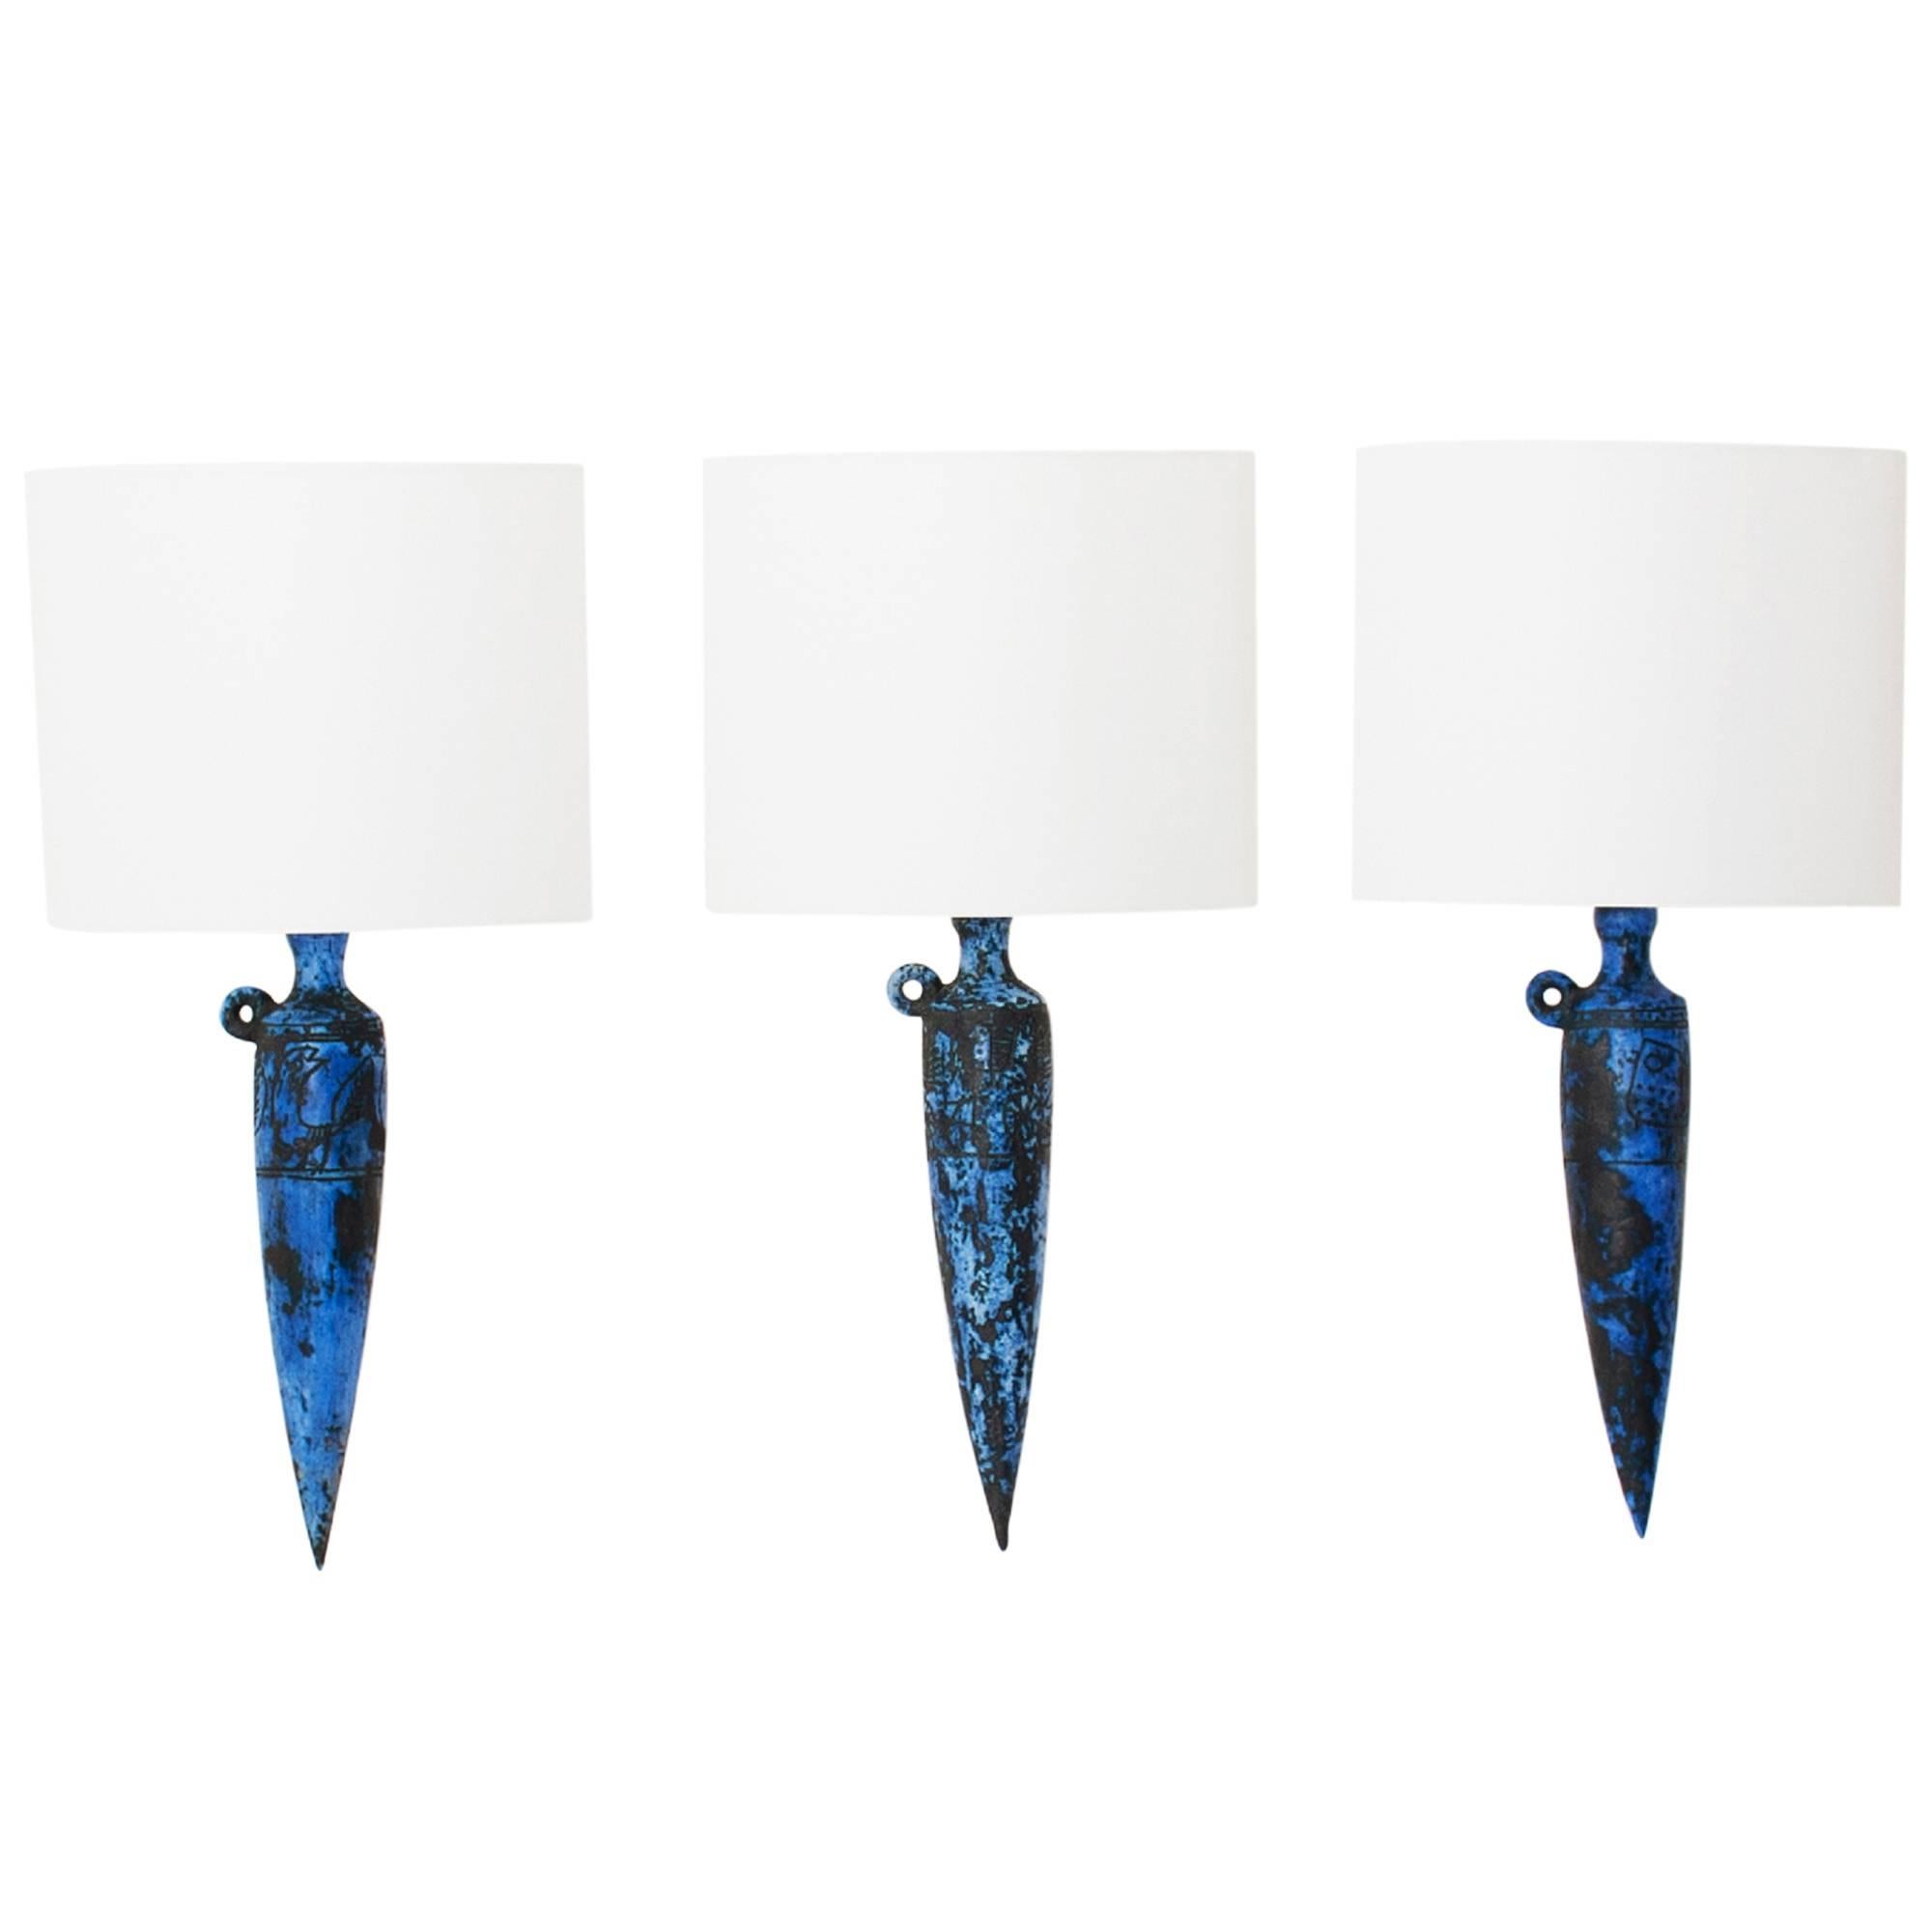 Rare set of three sconces by Jacques Blin. Each sconce has Primitive style Sgraffito decoration in blue glaze. Rewired and unoriginal shade.